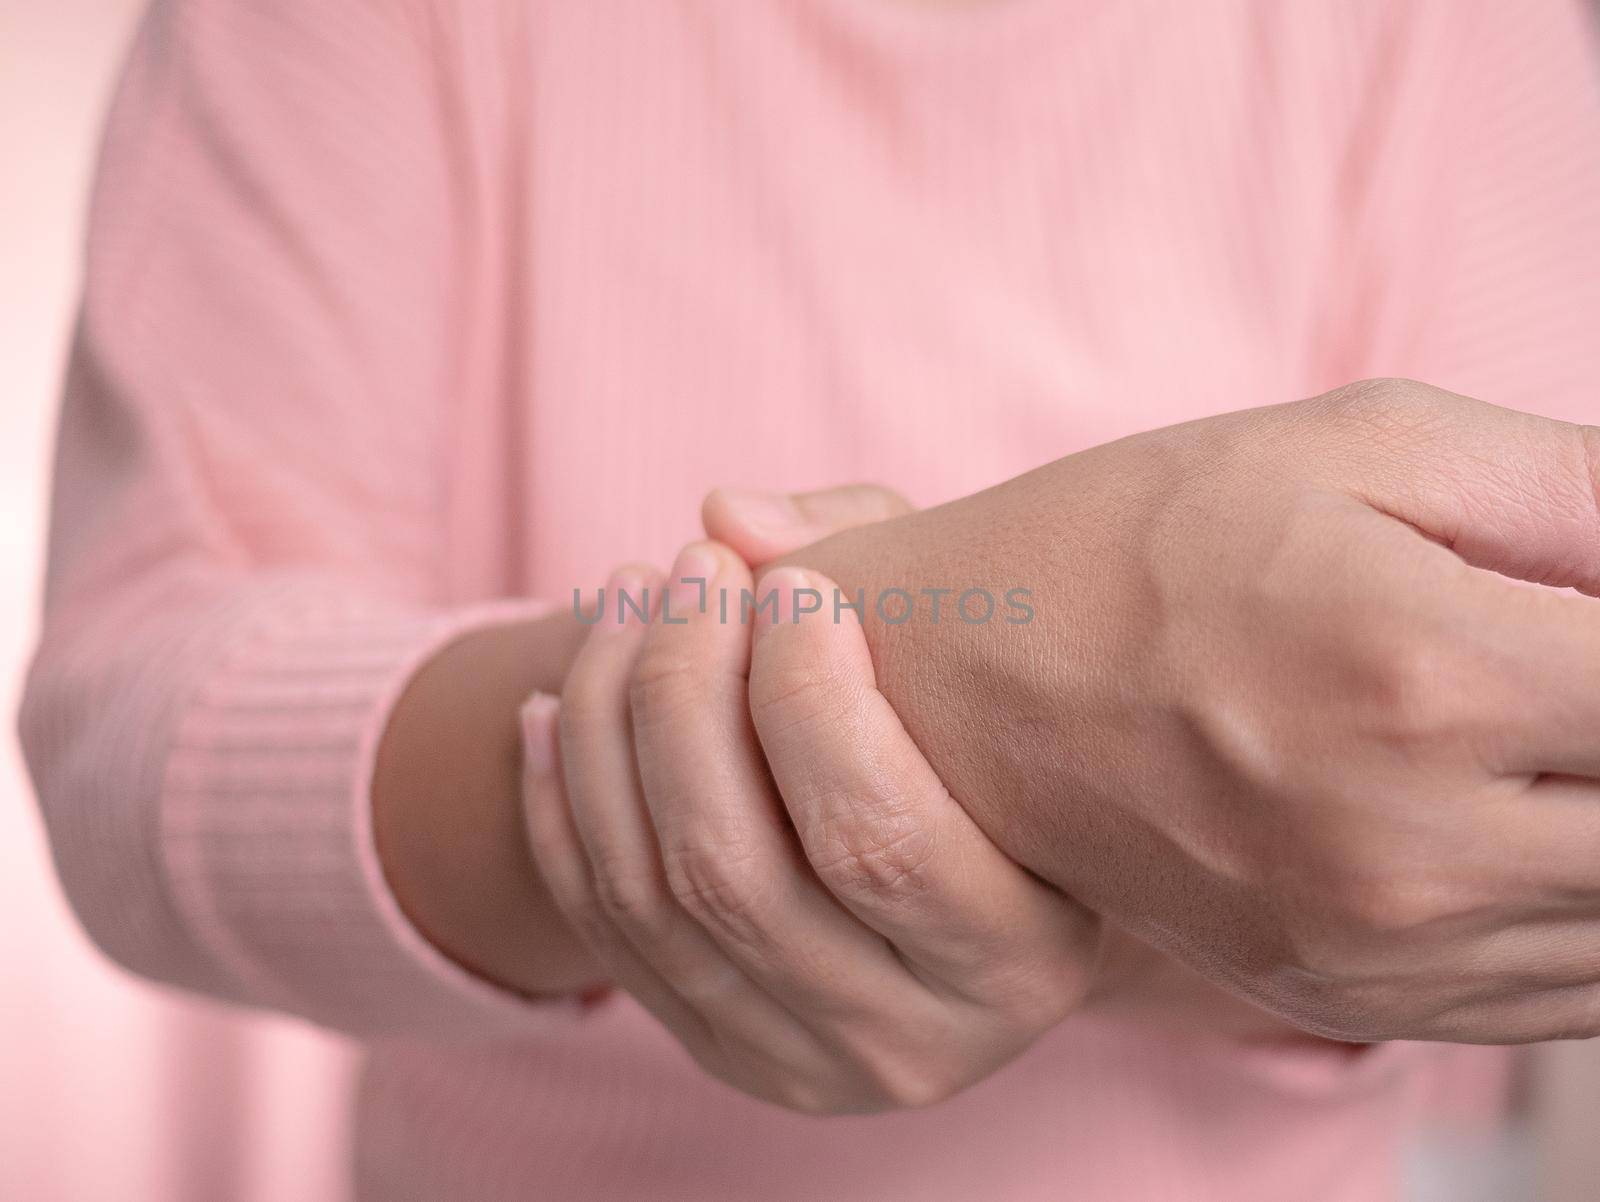 Closeup of female holding her painful wrist caused by prolonged work on the computer or housewife, Carpal tunnel syndrome, arthritis. Neurological disease concept. by TEERASAK